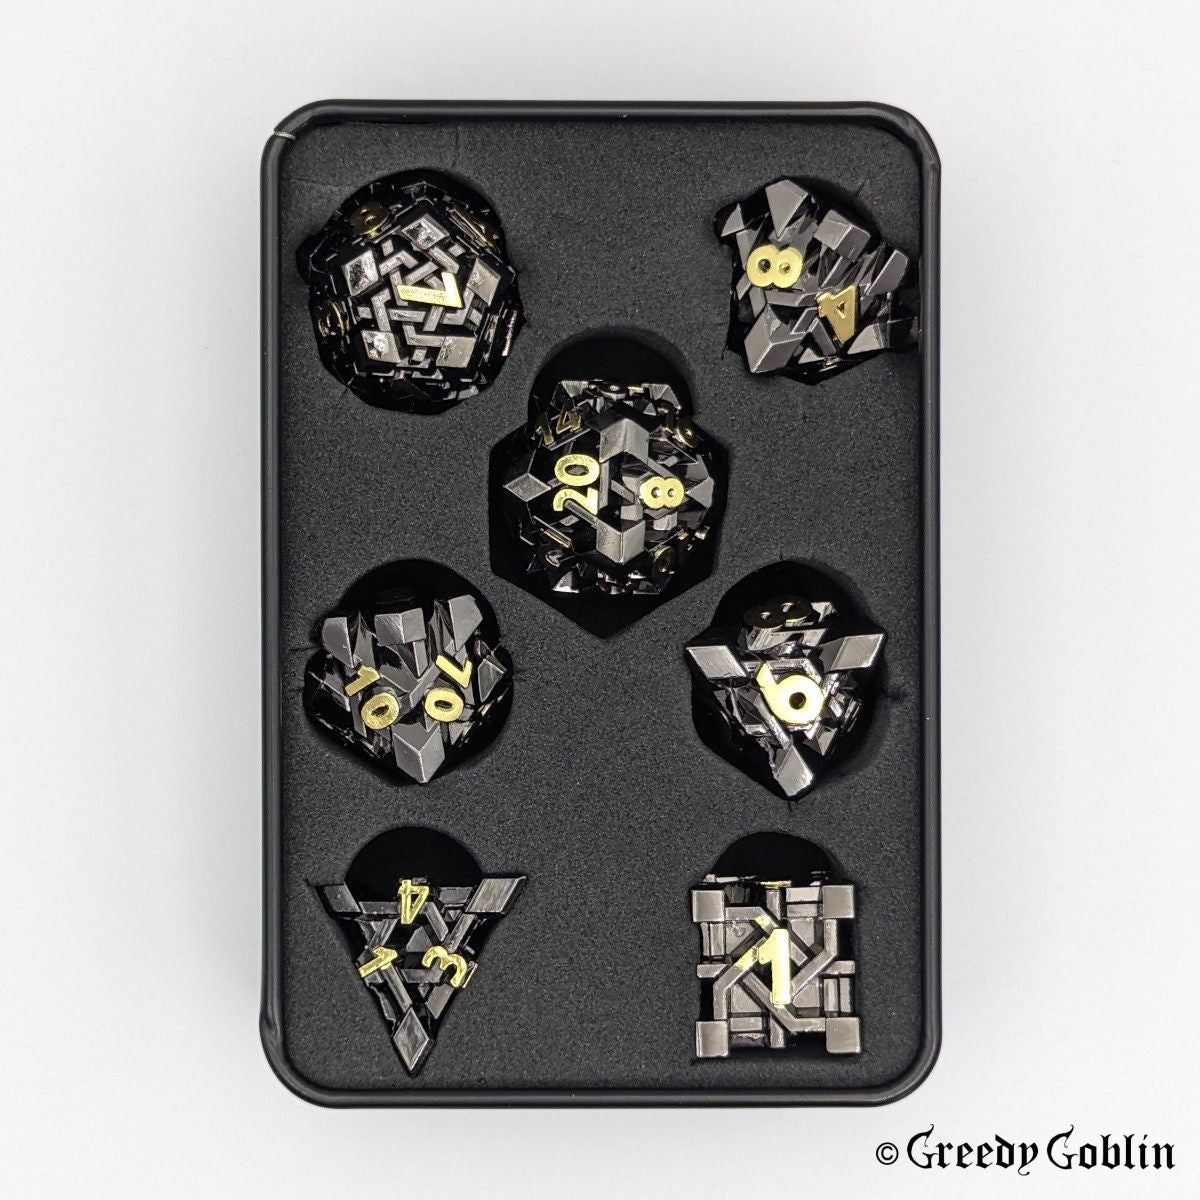 Dwarven Runestone Polydice Set (D100, D8, D12, D10, D6, D20, D4) with black finish and gold numbers, in a tin box. 